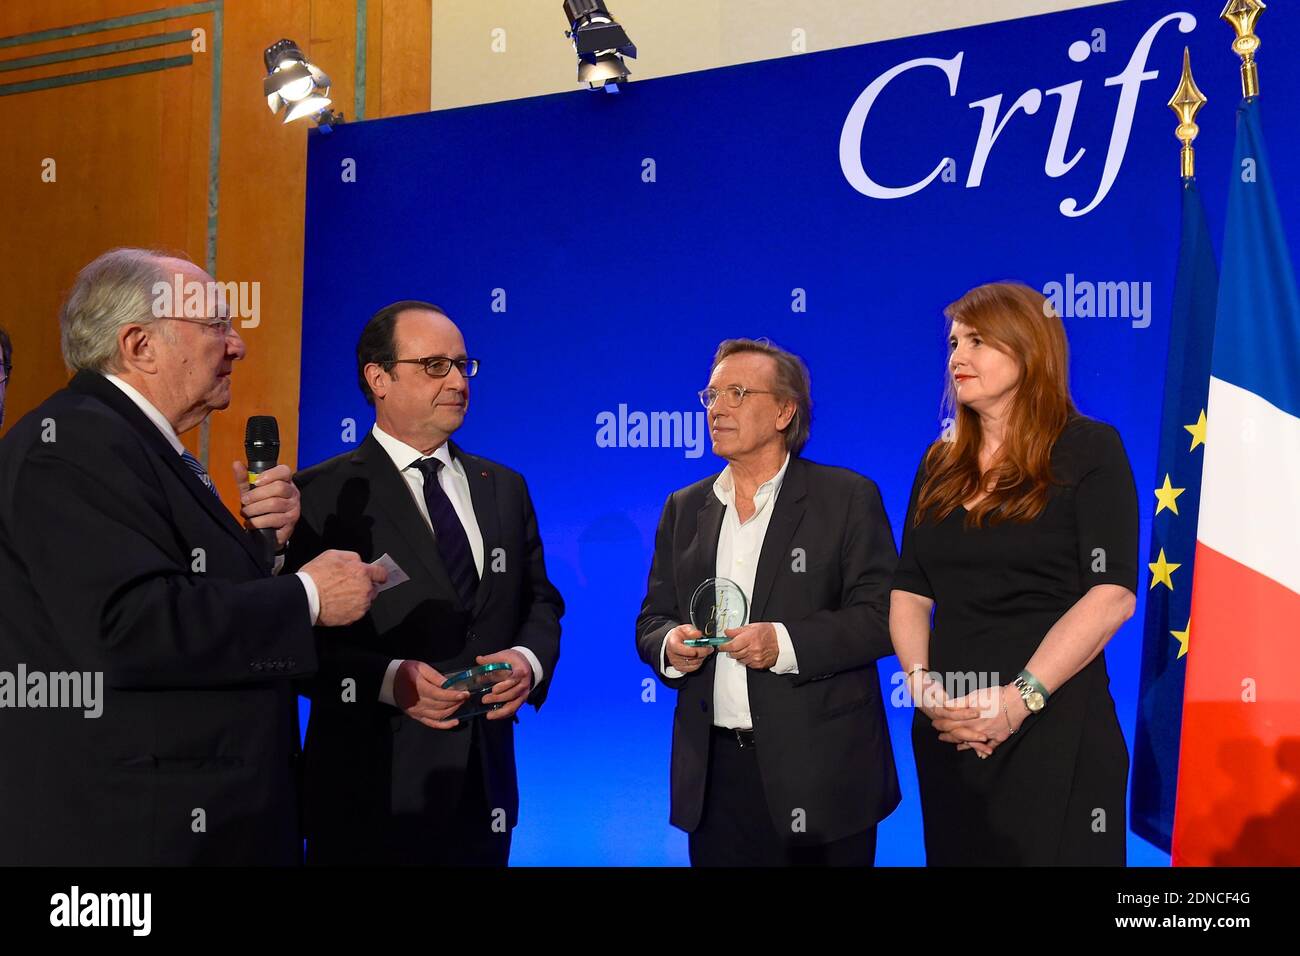 (L-R) CRIF president Roger Cukierman, French President Francois Hollande, director Alexander Arcady and producer Marie-Castille Mention-Schaar during the 30th annual Dinner of the Representative Council of the Jews of France (CRIF) held at the Pullman Montparnasse Hotel in Paris, France on February 23, 2015. Photo Pool by Erez Lichtfeld/ABACAPRESS.COM Stock Photo